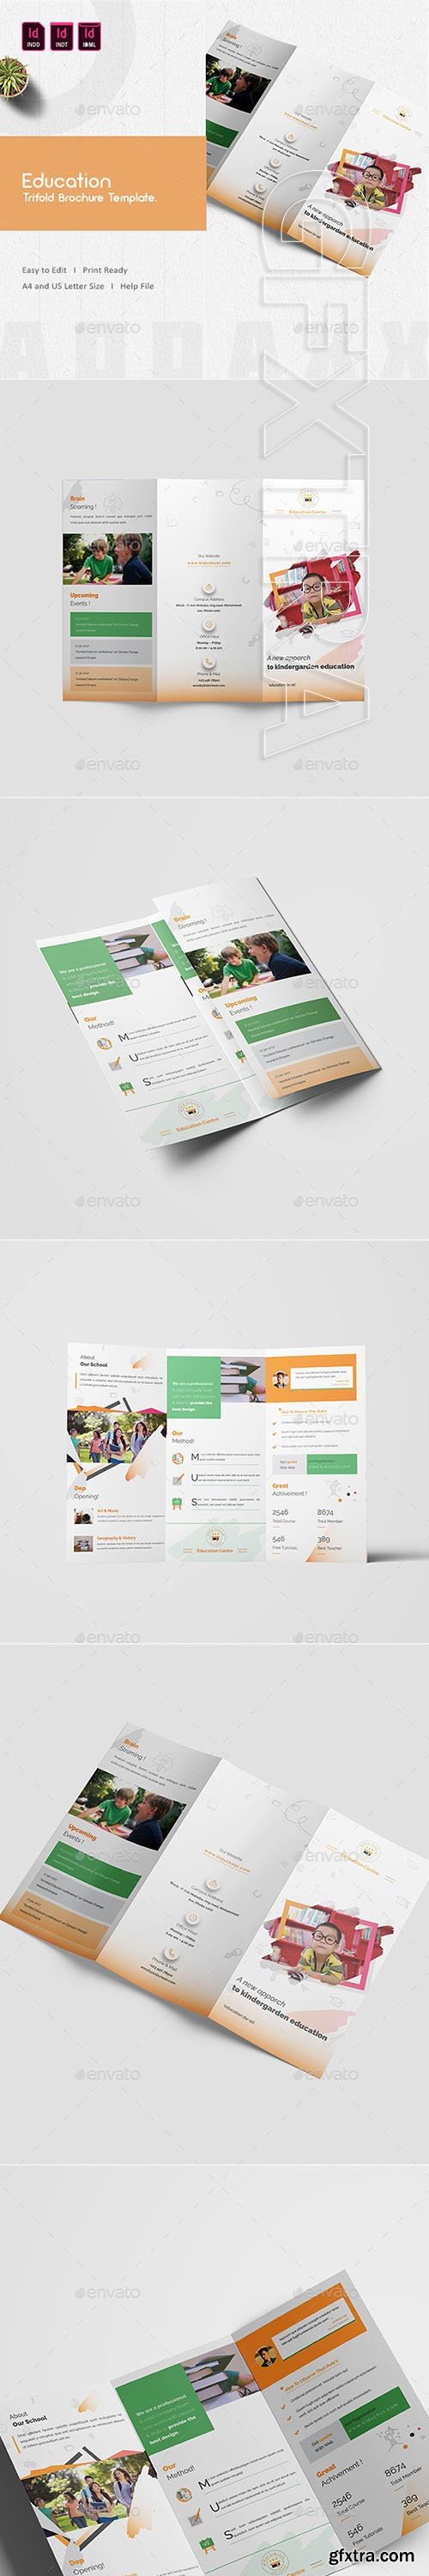 GraphicRiver - Education Trifold Brochure Template 20932756